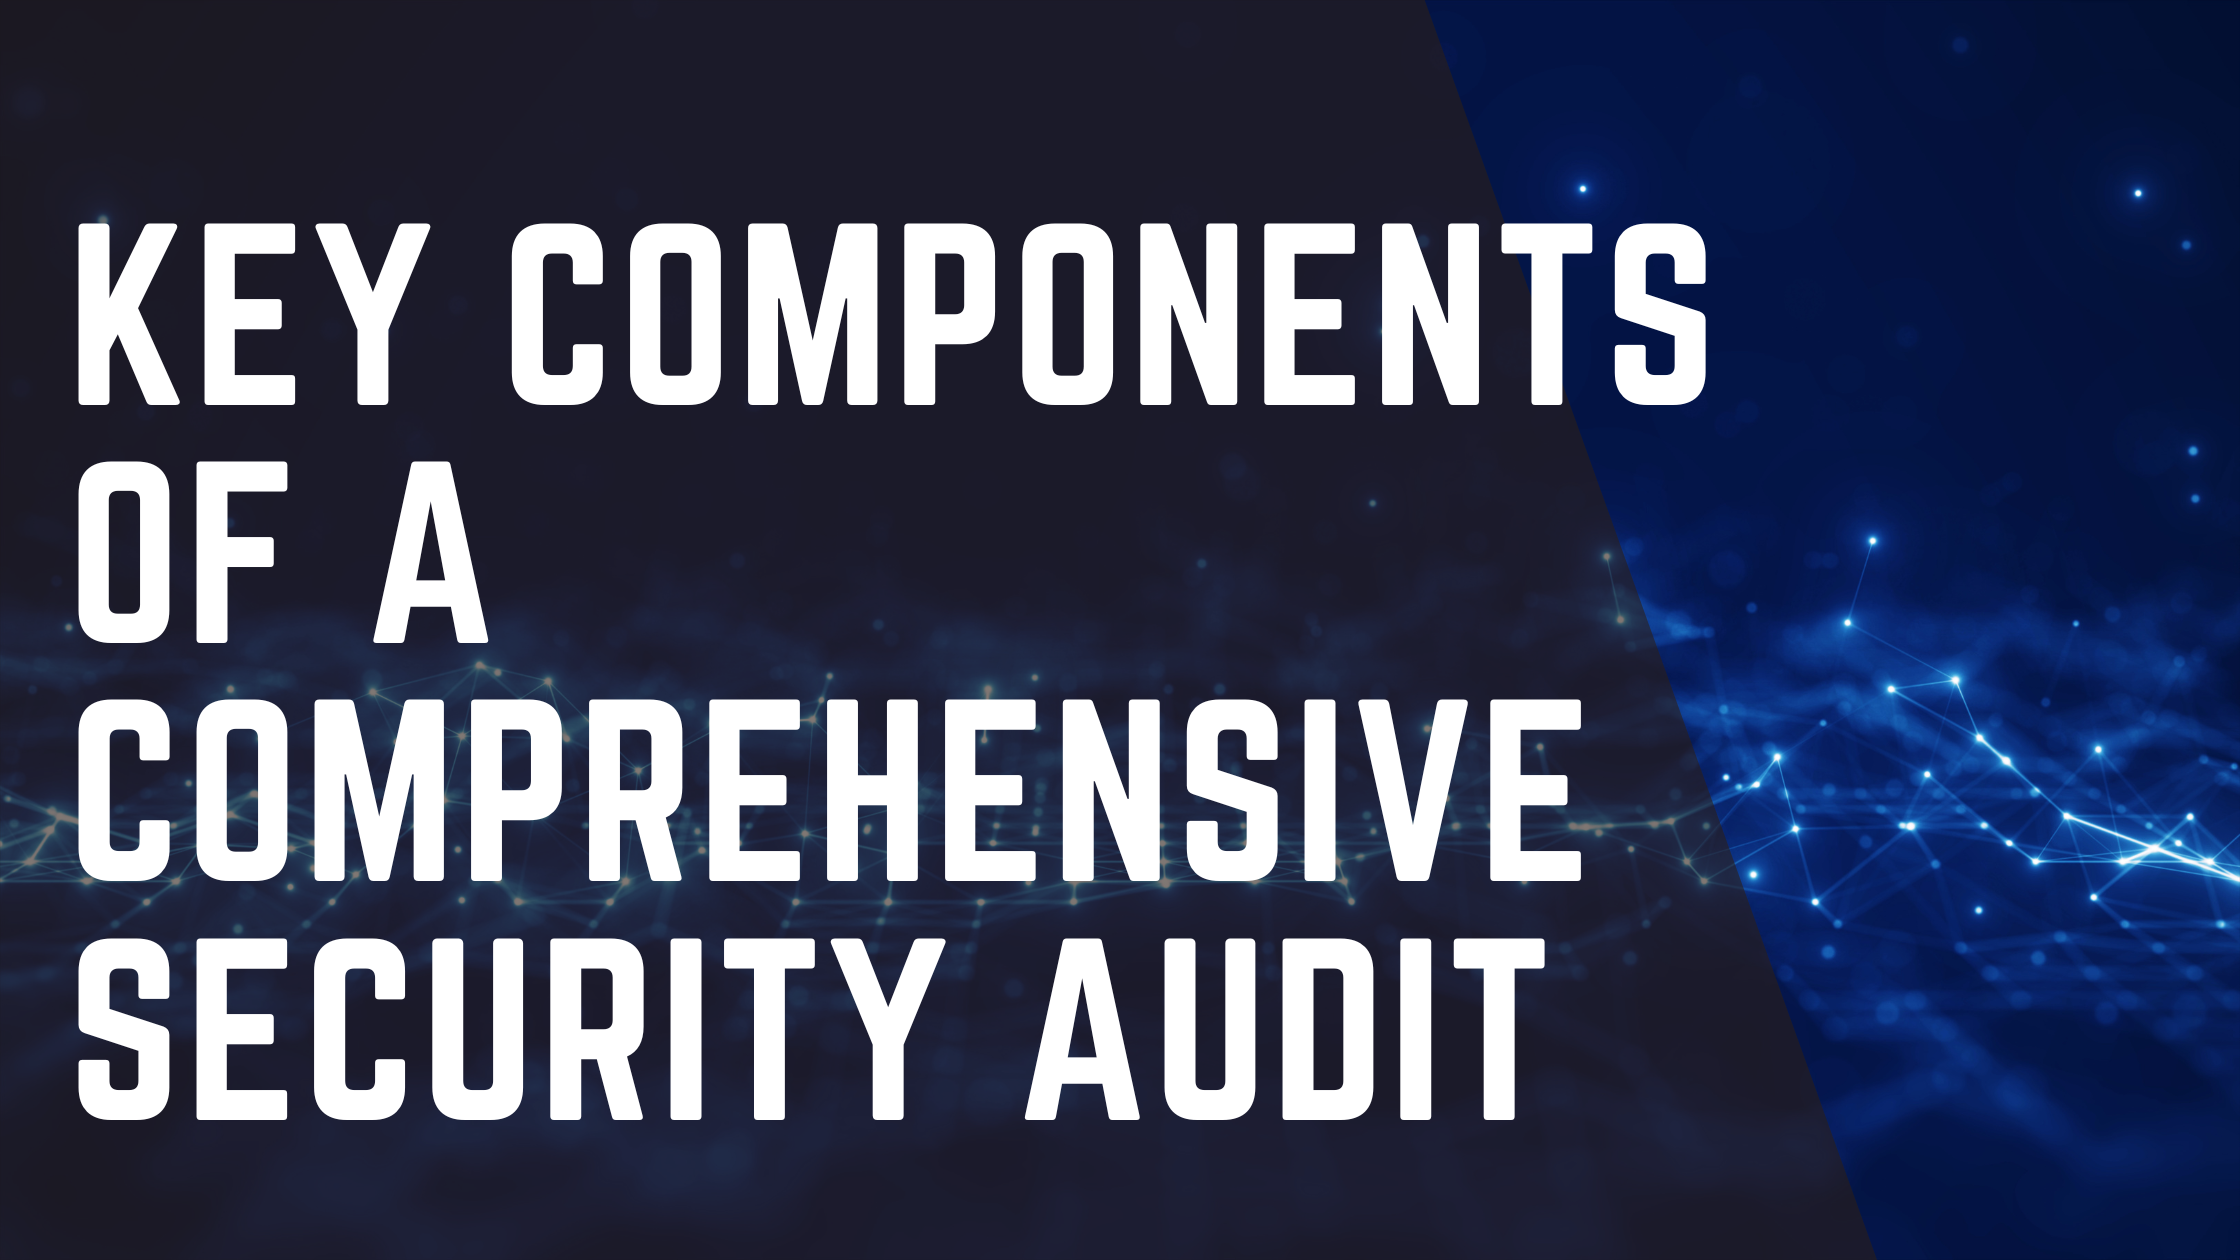 Key Components of a Comprehensive Security Audit